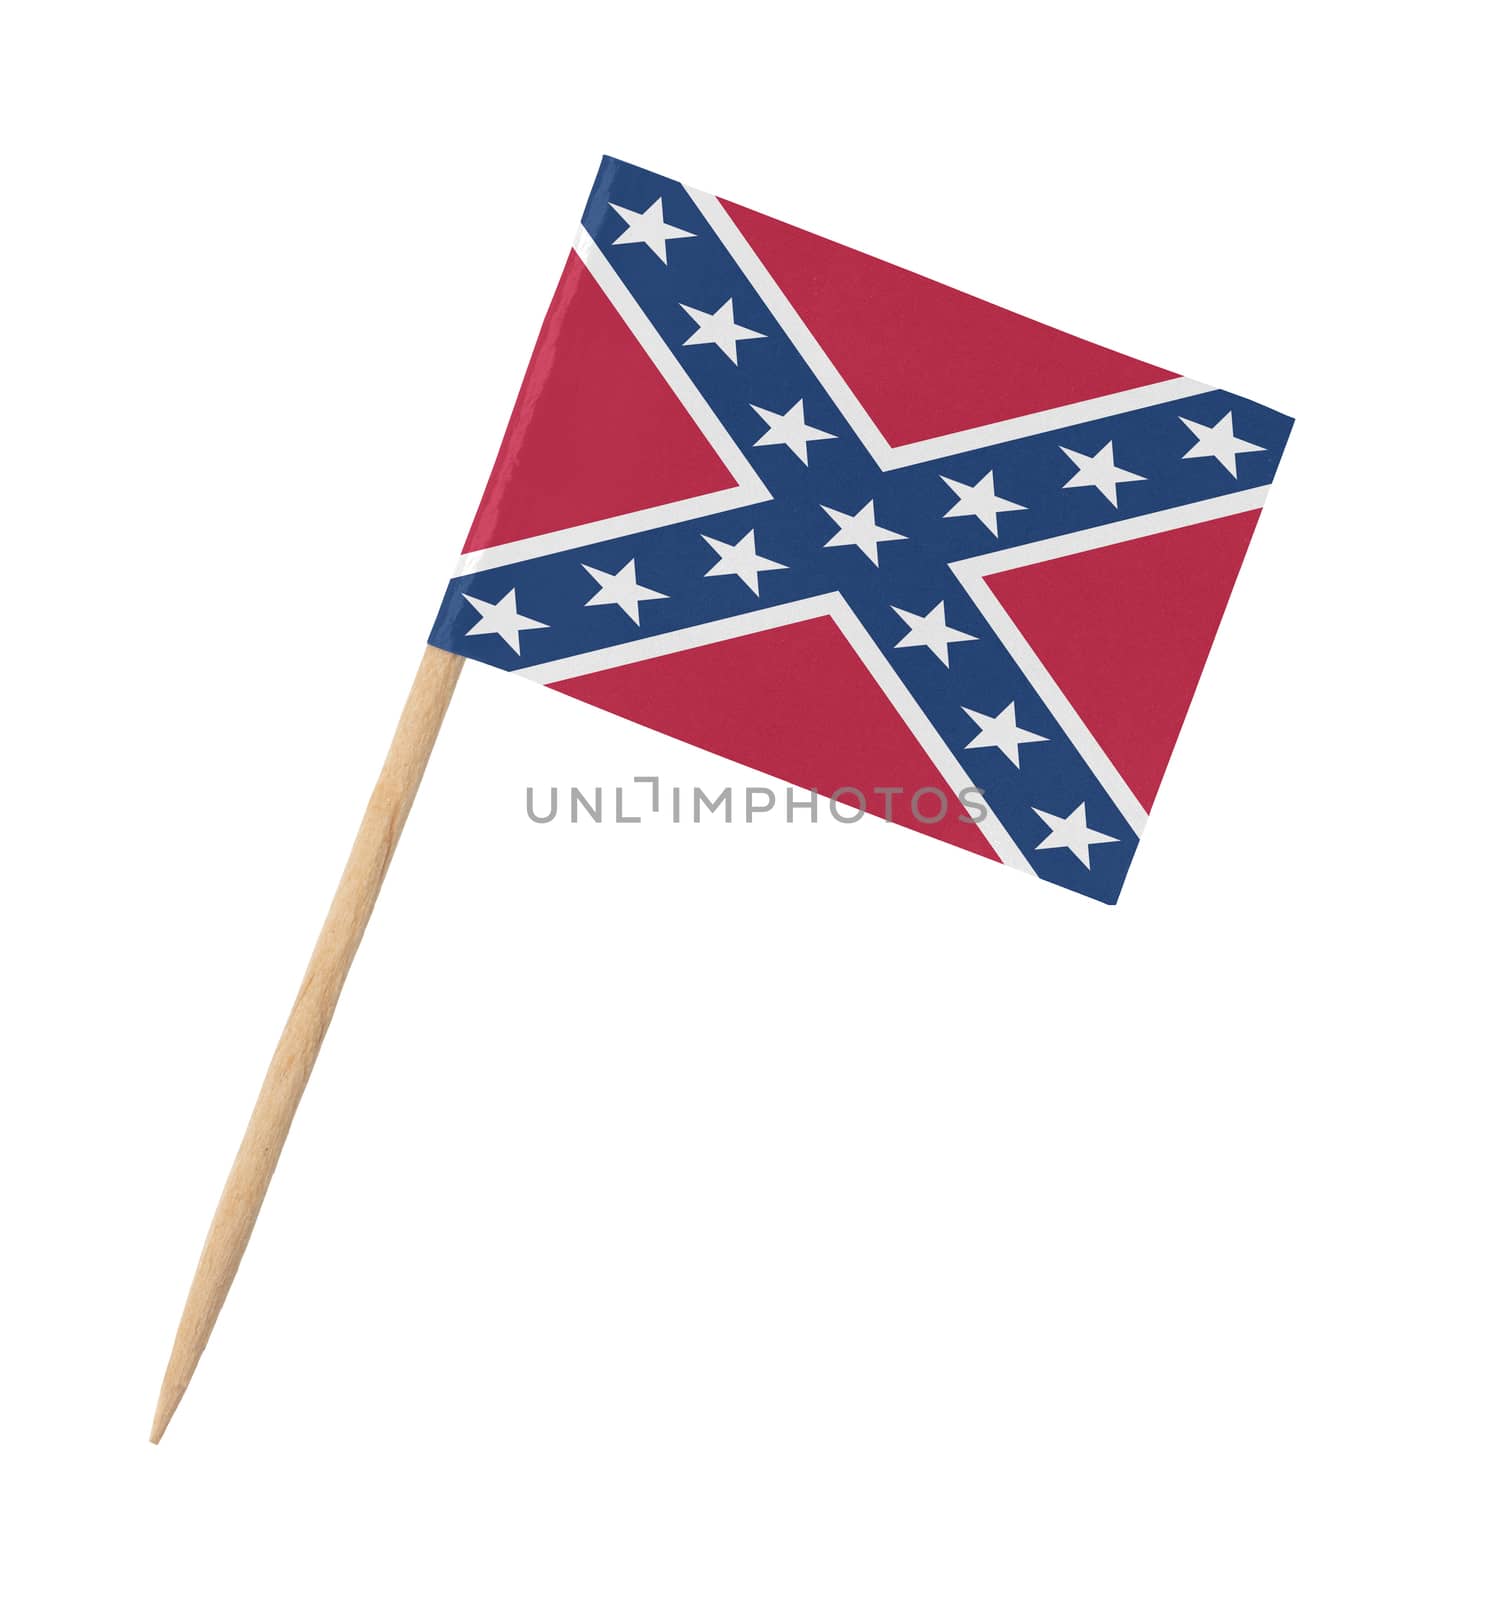 Small paper Confederate flag on wooden stick by michaklootwijk